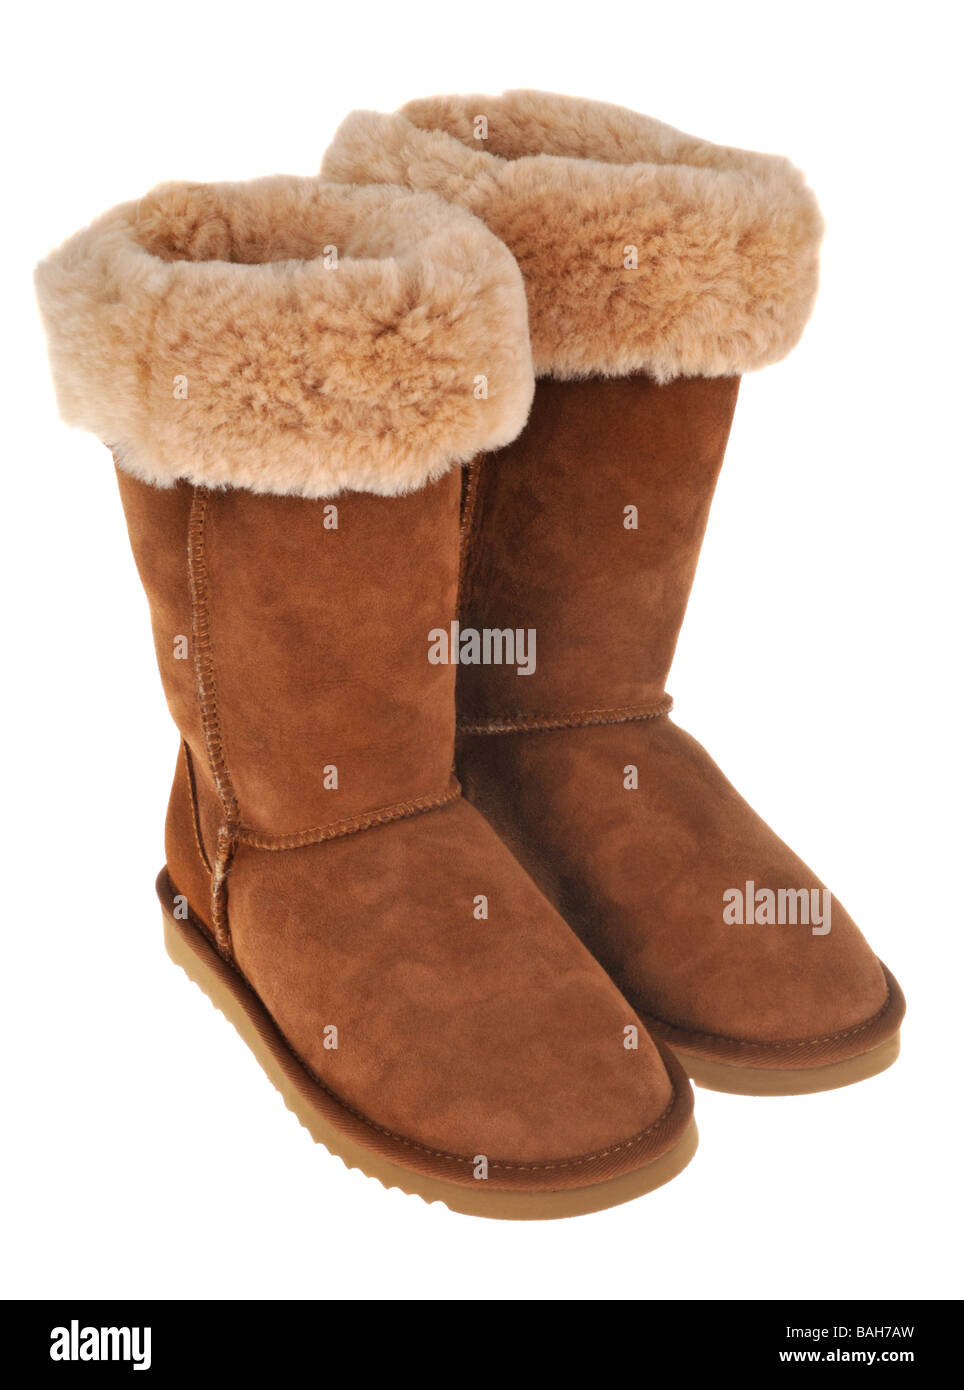 show me pictures of ugg boots